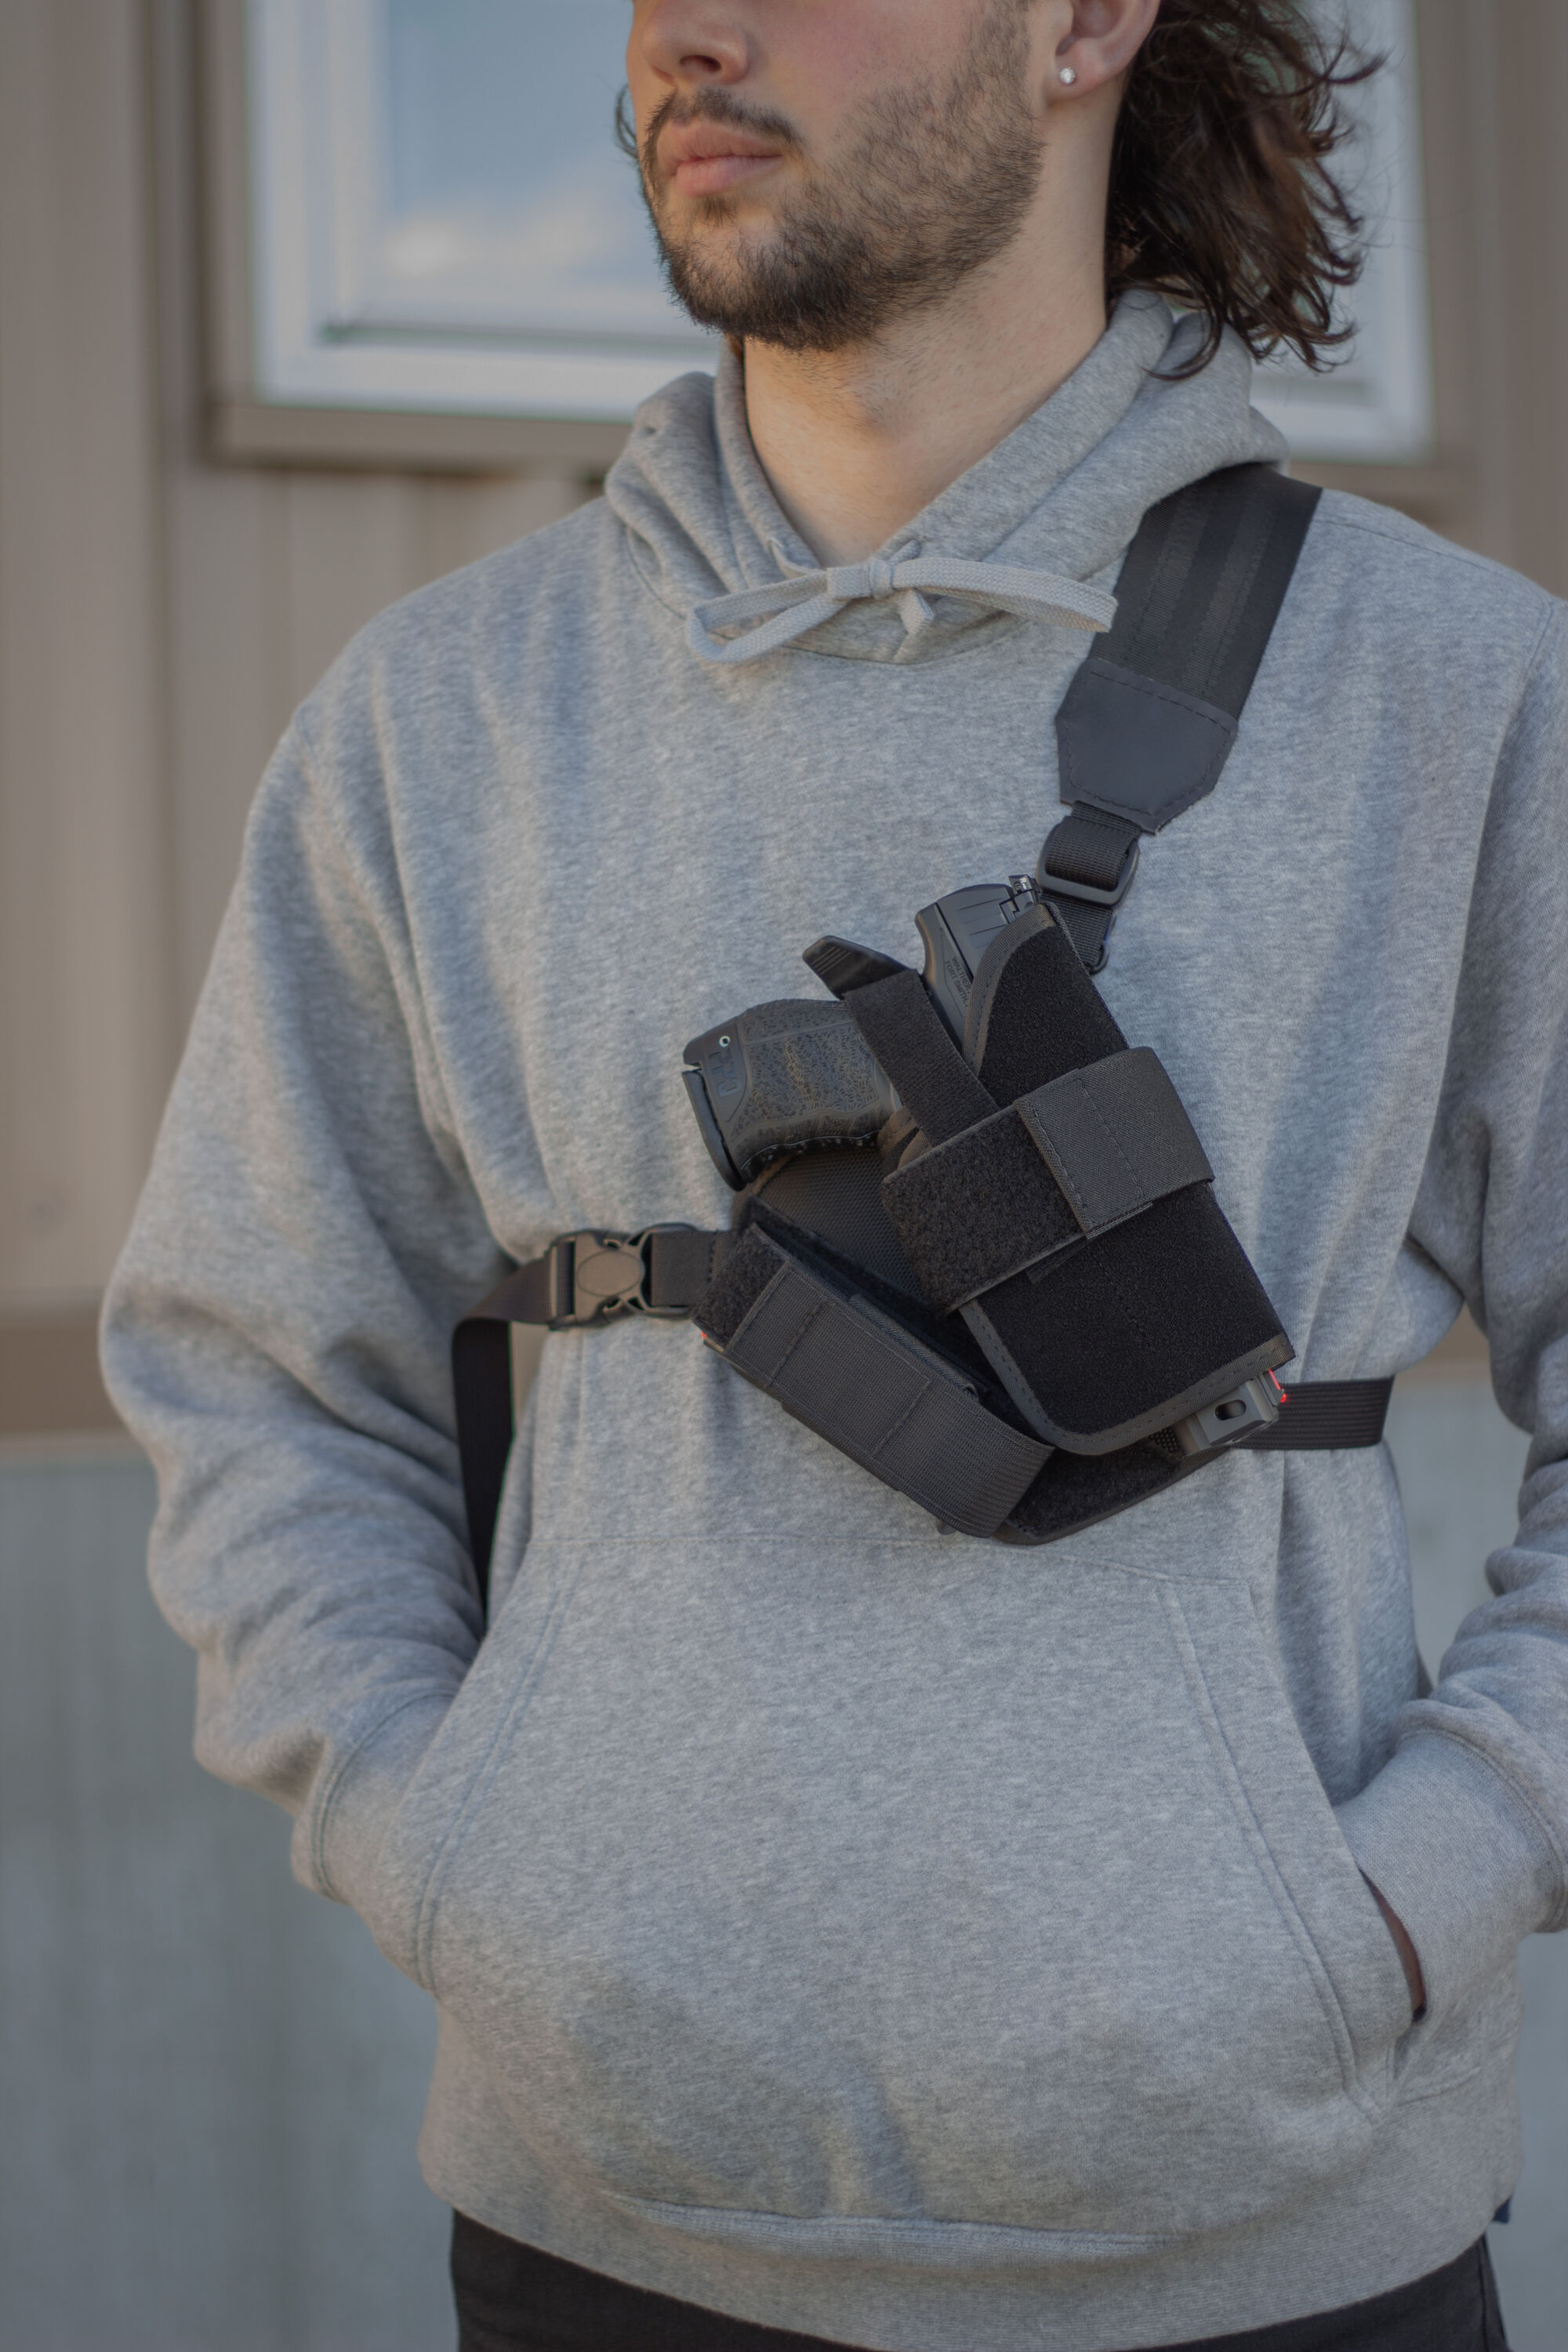 Durable and Comfortable Chest Holster for Guns - Elite Survival